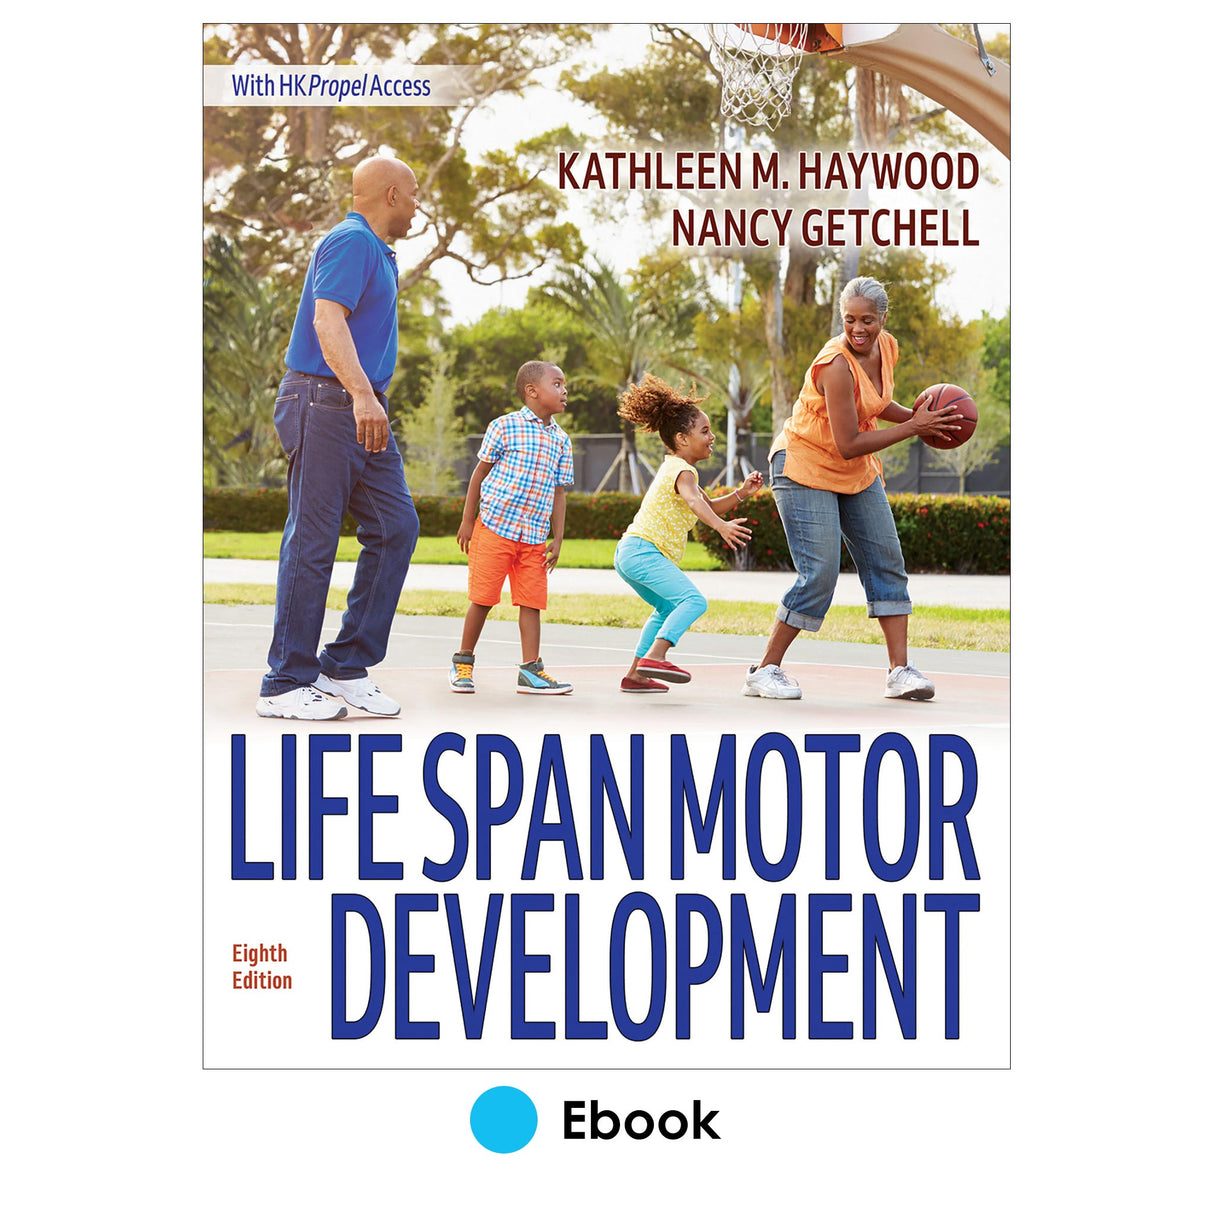 Life Span Motor Development 8th Edition Ebook With HKPropel Access